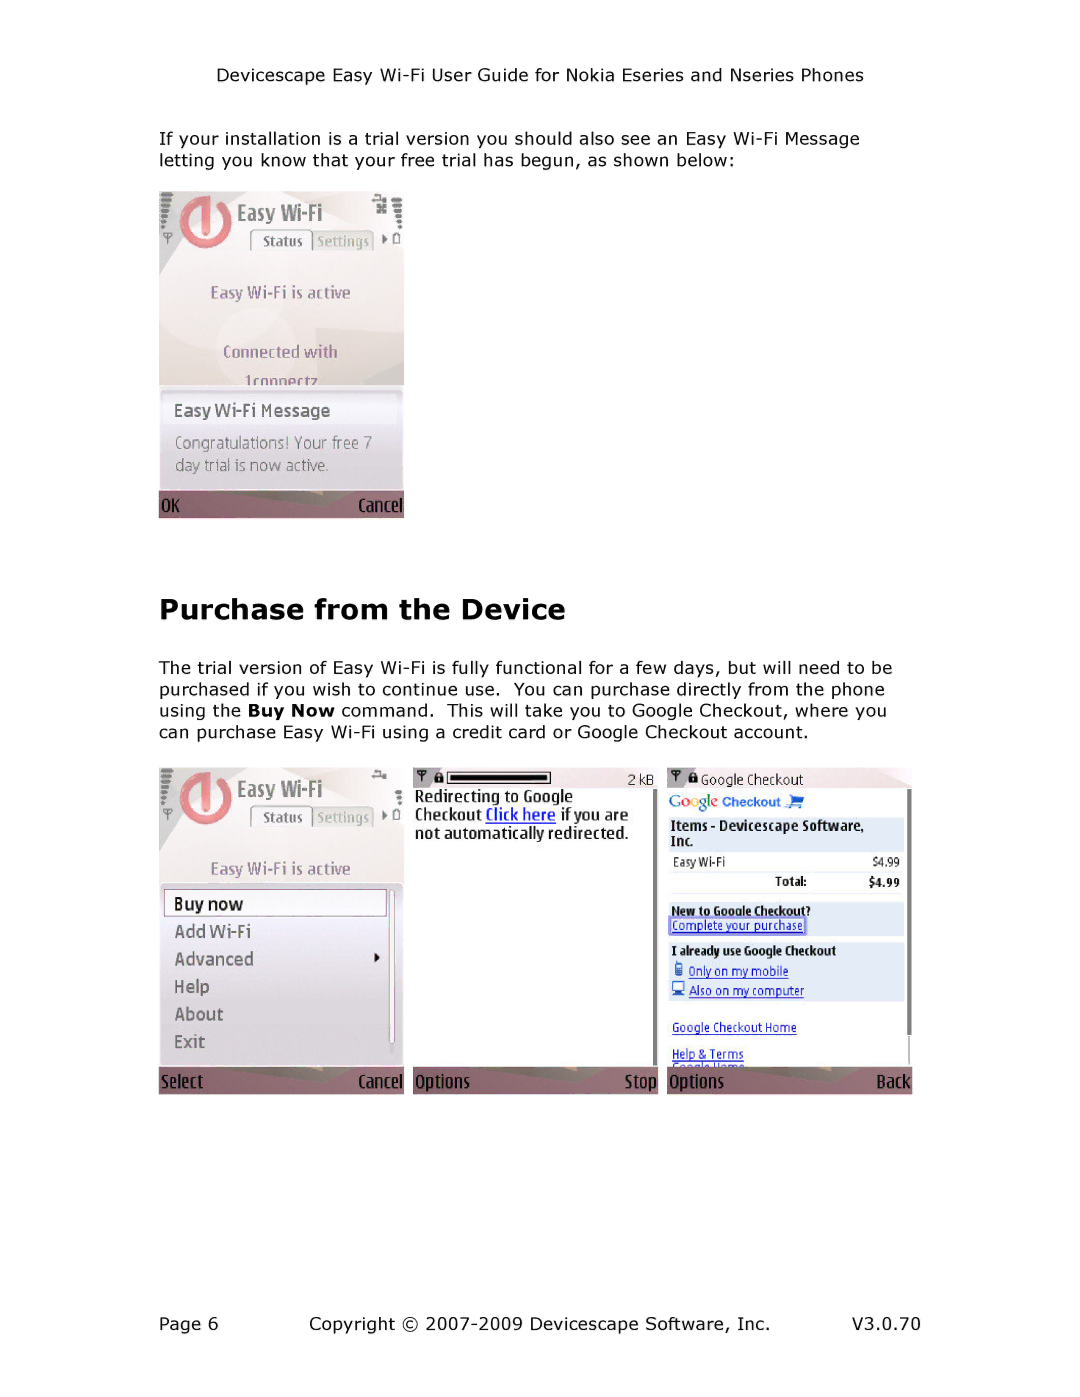 Nokia V3.0.70 manual Purchase from the Device 